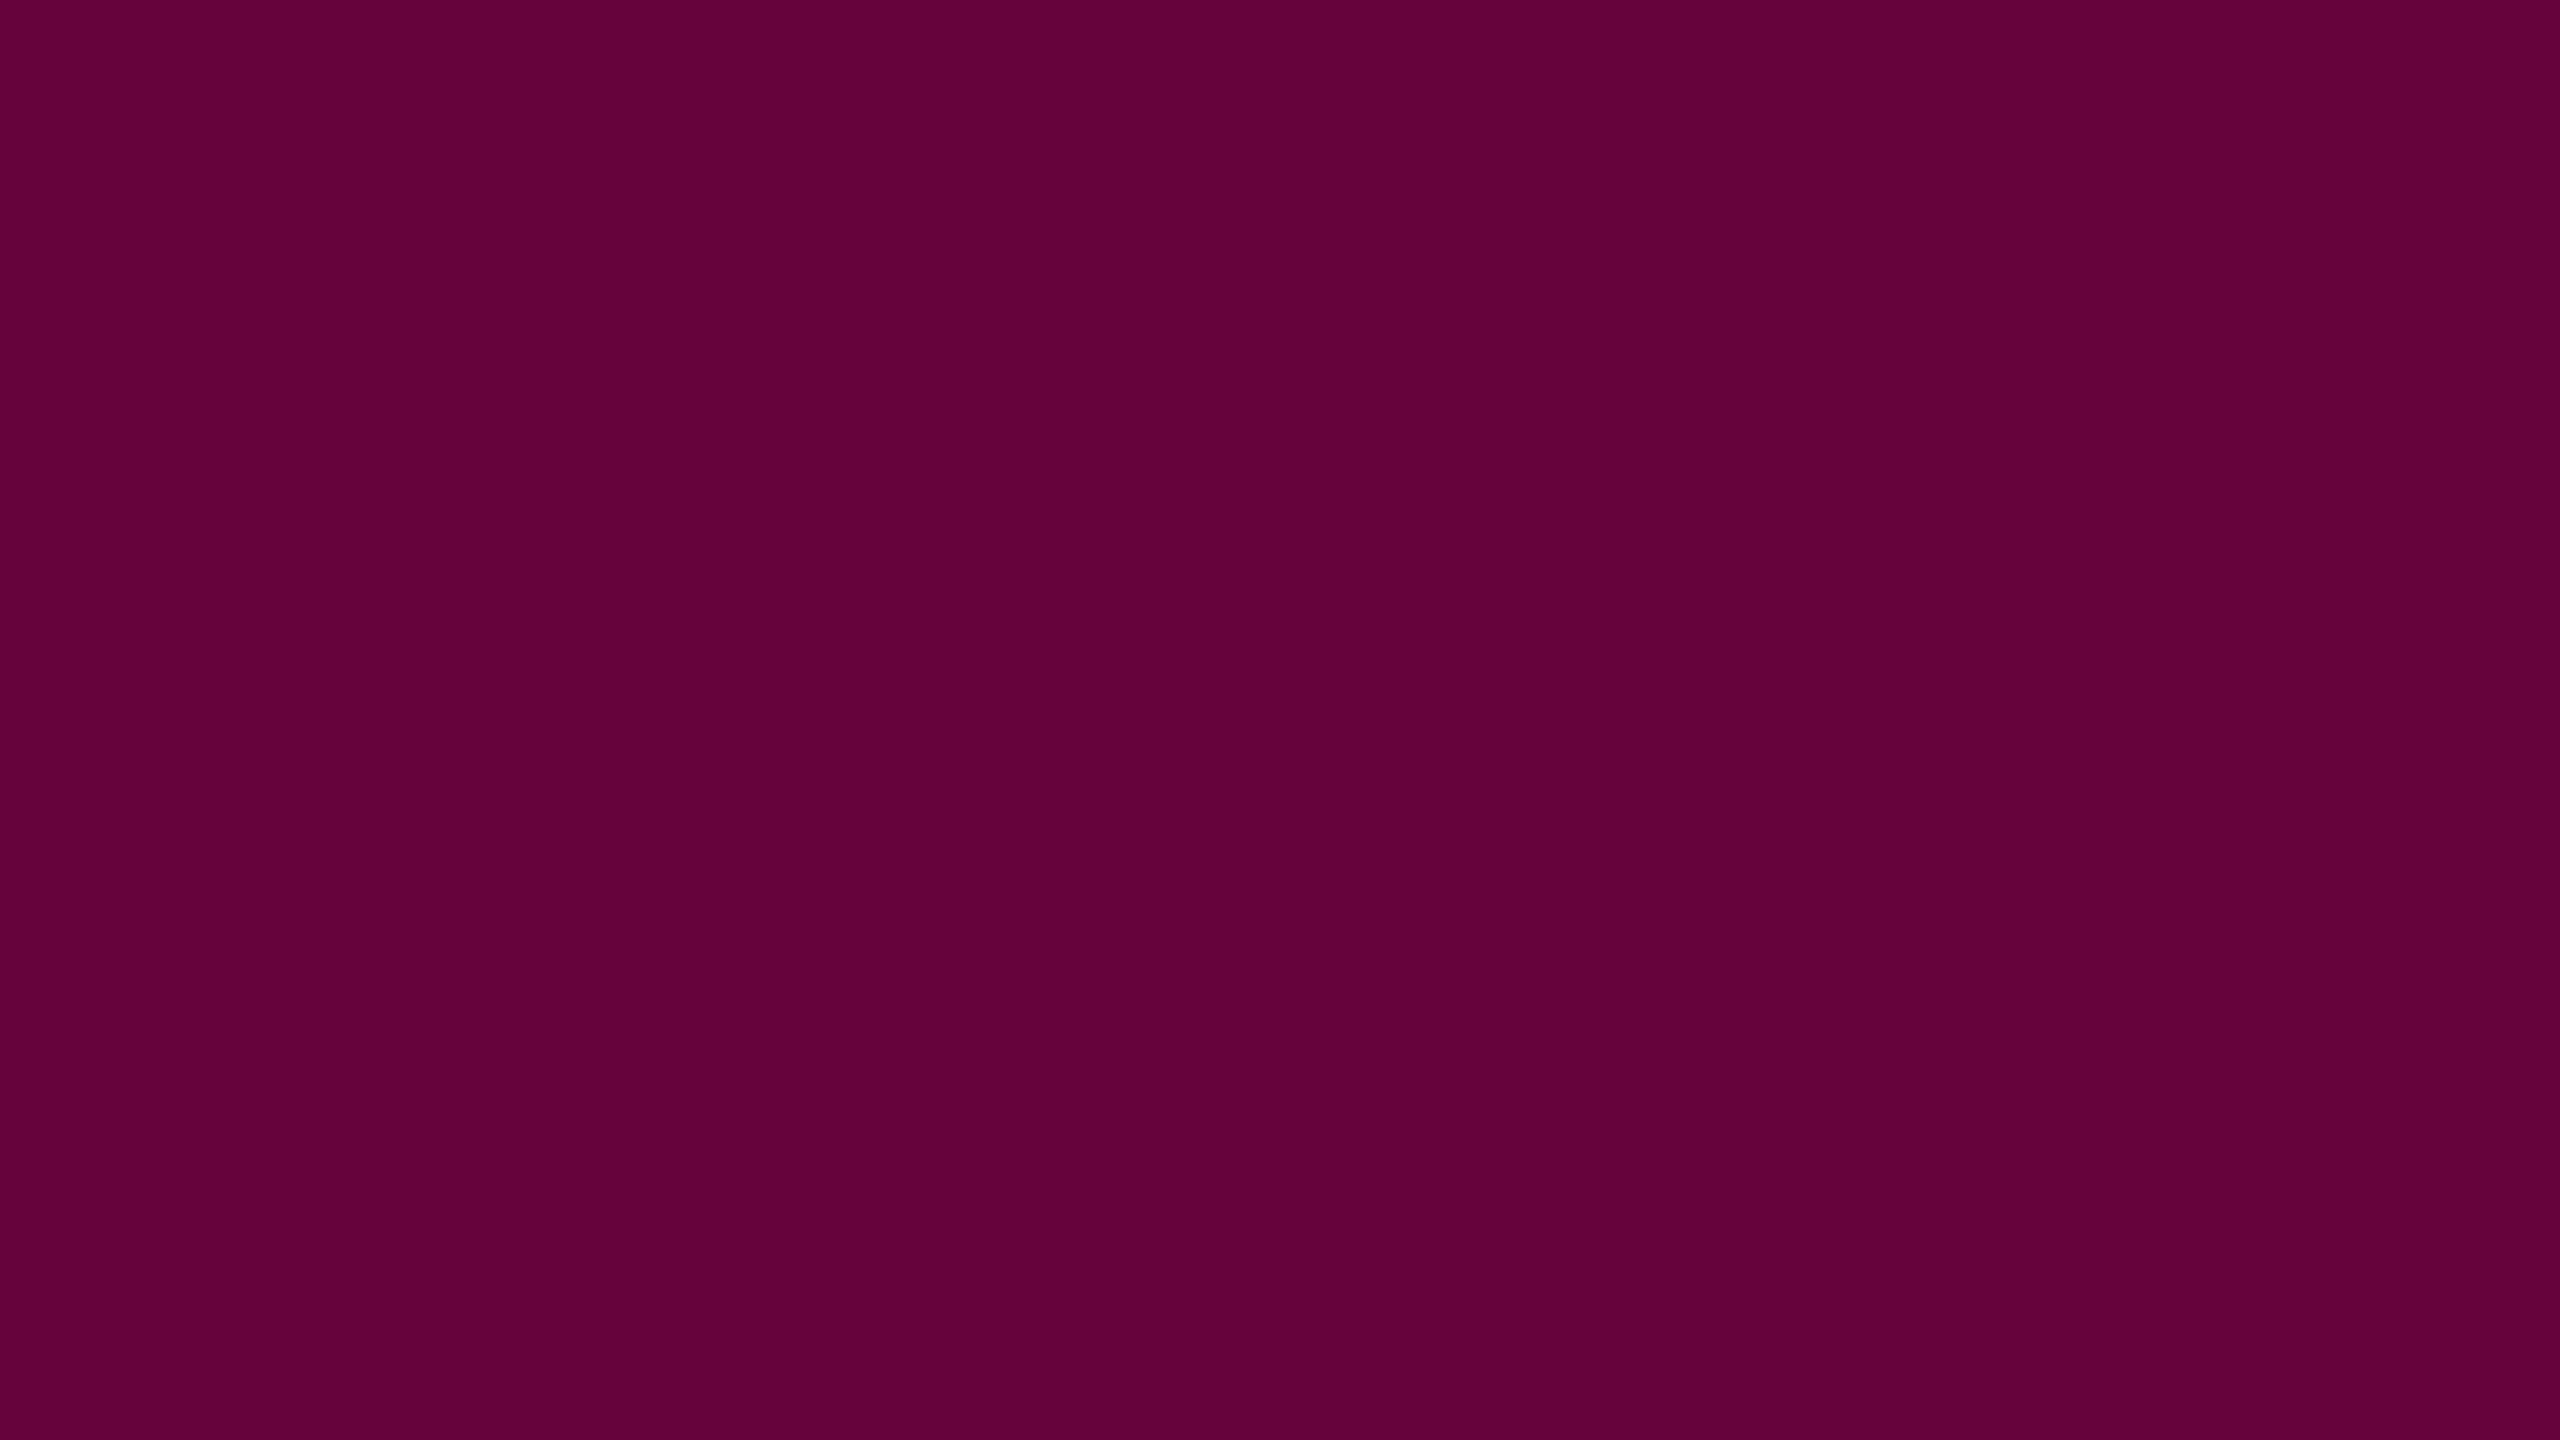 2560x1440 -imperial-purple-solid-color-background.jpg